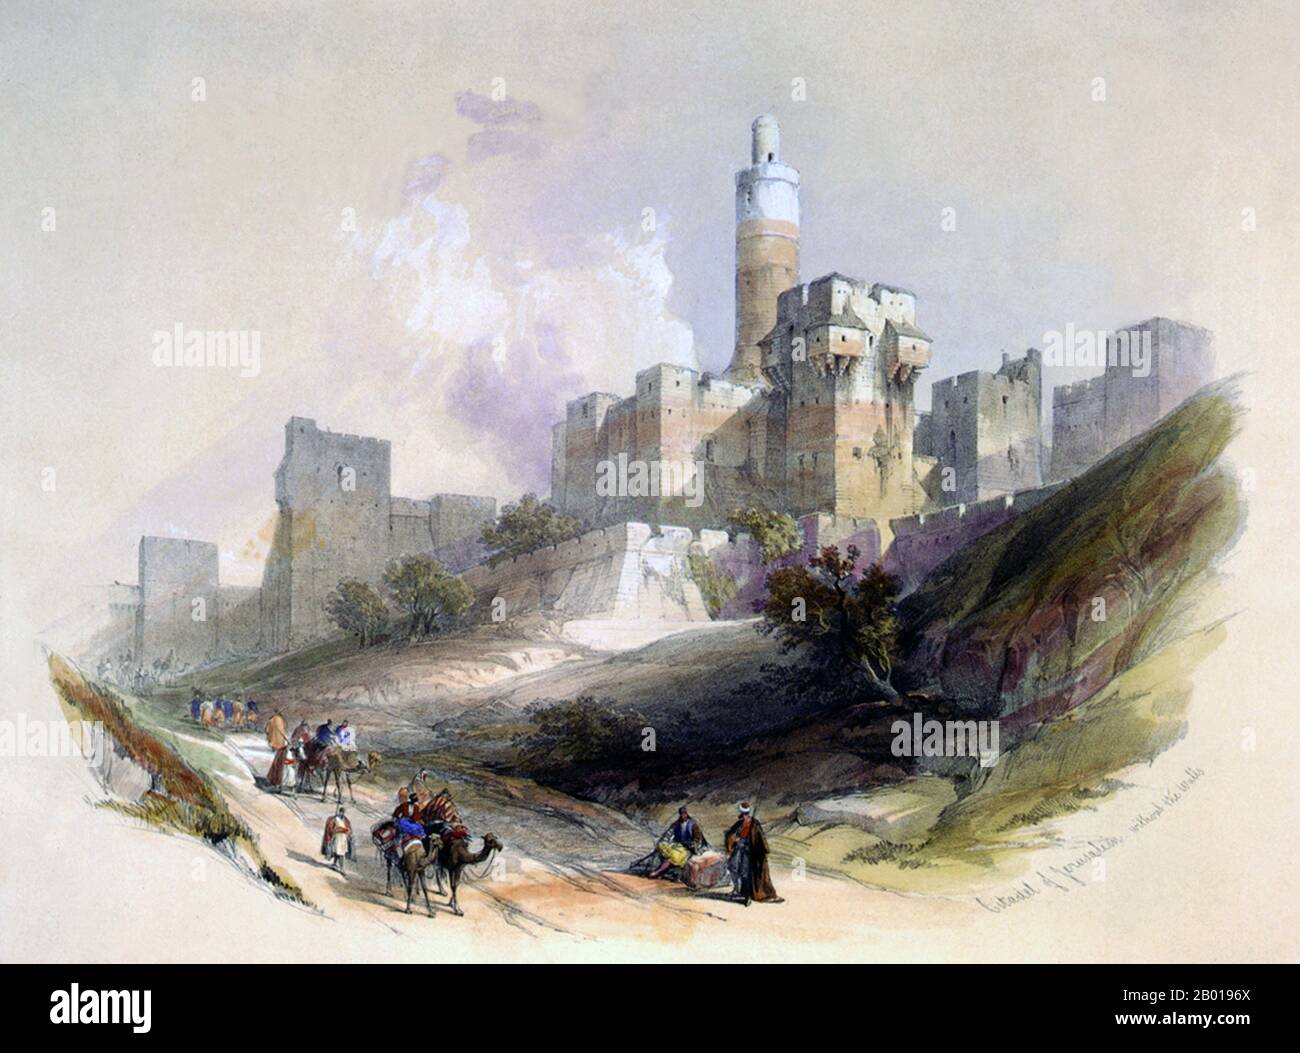 Palestine: 'The Citadel of Jerusalem, without the Walls, Tower of David'. Colour lithograph by David Roberts (24 October 1796 - 25 November 1864), c. 1839.  David Roberts RA was a Scottish painter. He is especially known for a prolific series of detailed prints of Egypt and the Near East that he produced during the 1840s from sketches he made during long tours of the region (1838–1840). This work, and his large oil paintings of similar subjects, made him a prominent Orientalist painter.  At the time of Roberts’ visit to Palestine, the country was briefly under Egyptian rule (1831-1841). Stock Photo